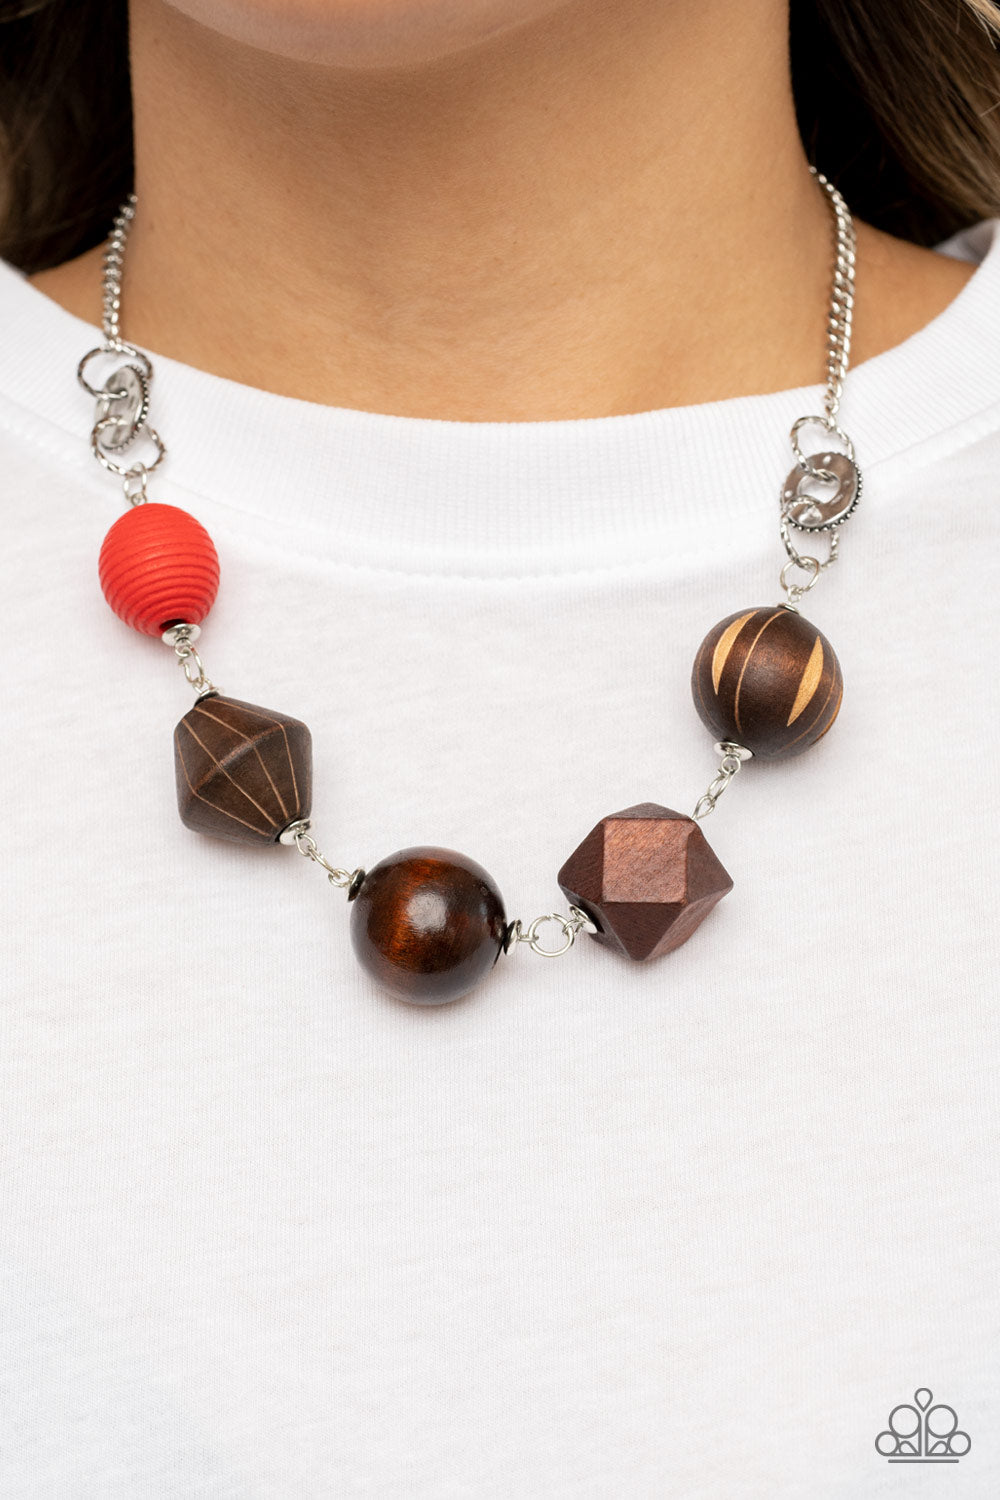 Eco Extravaganza Red Necklace - Paparazzi Accessories  Infused with a solitaire red wooden bead, a mismatched assortment of studded silver hoops, textured silver rings, and oversized brown wooden beads delicately connect across the chest for a stylishly handcrafted fashion. Features an adjustable clasp closure.  Sold as one individual necklace. Includes one pair of matching earrings.